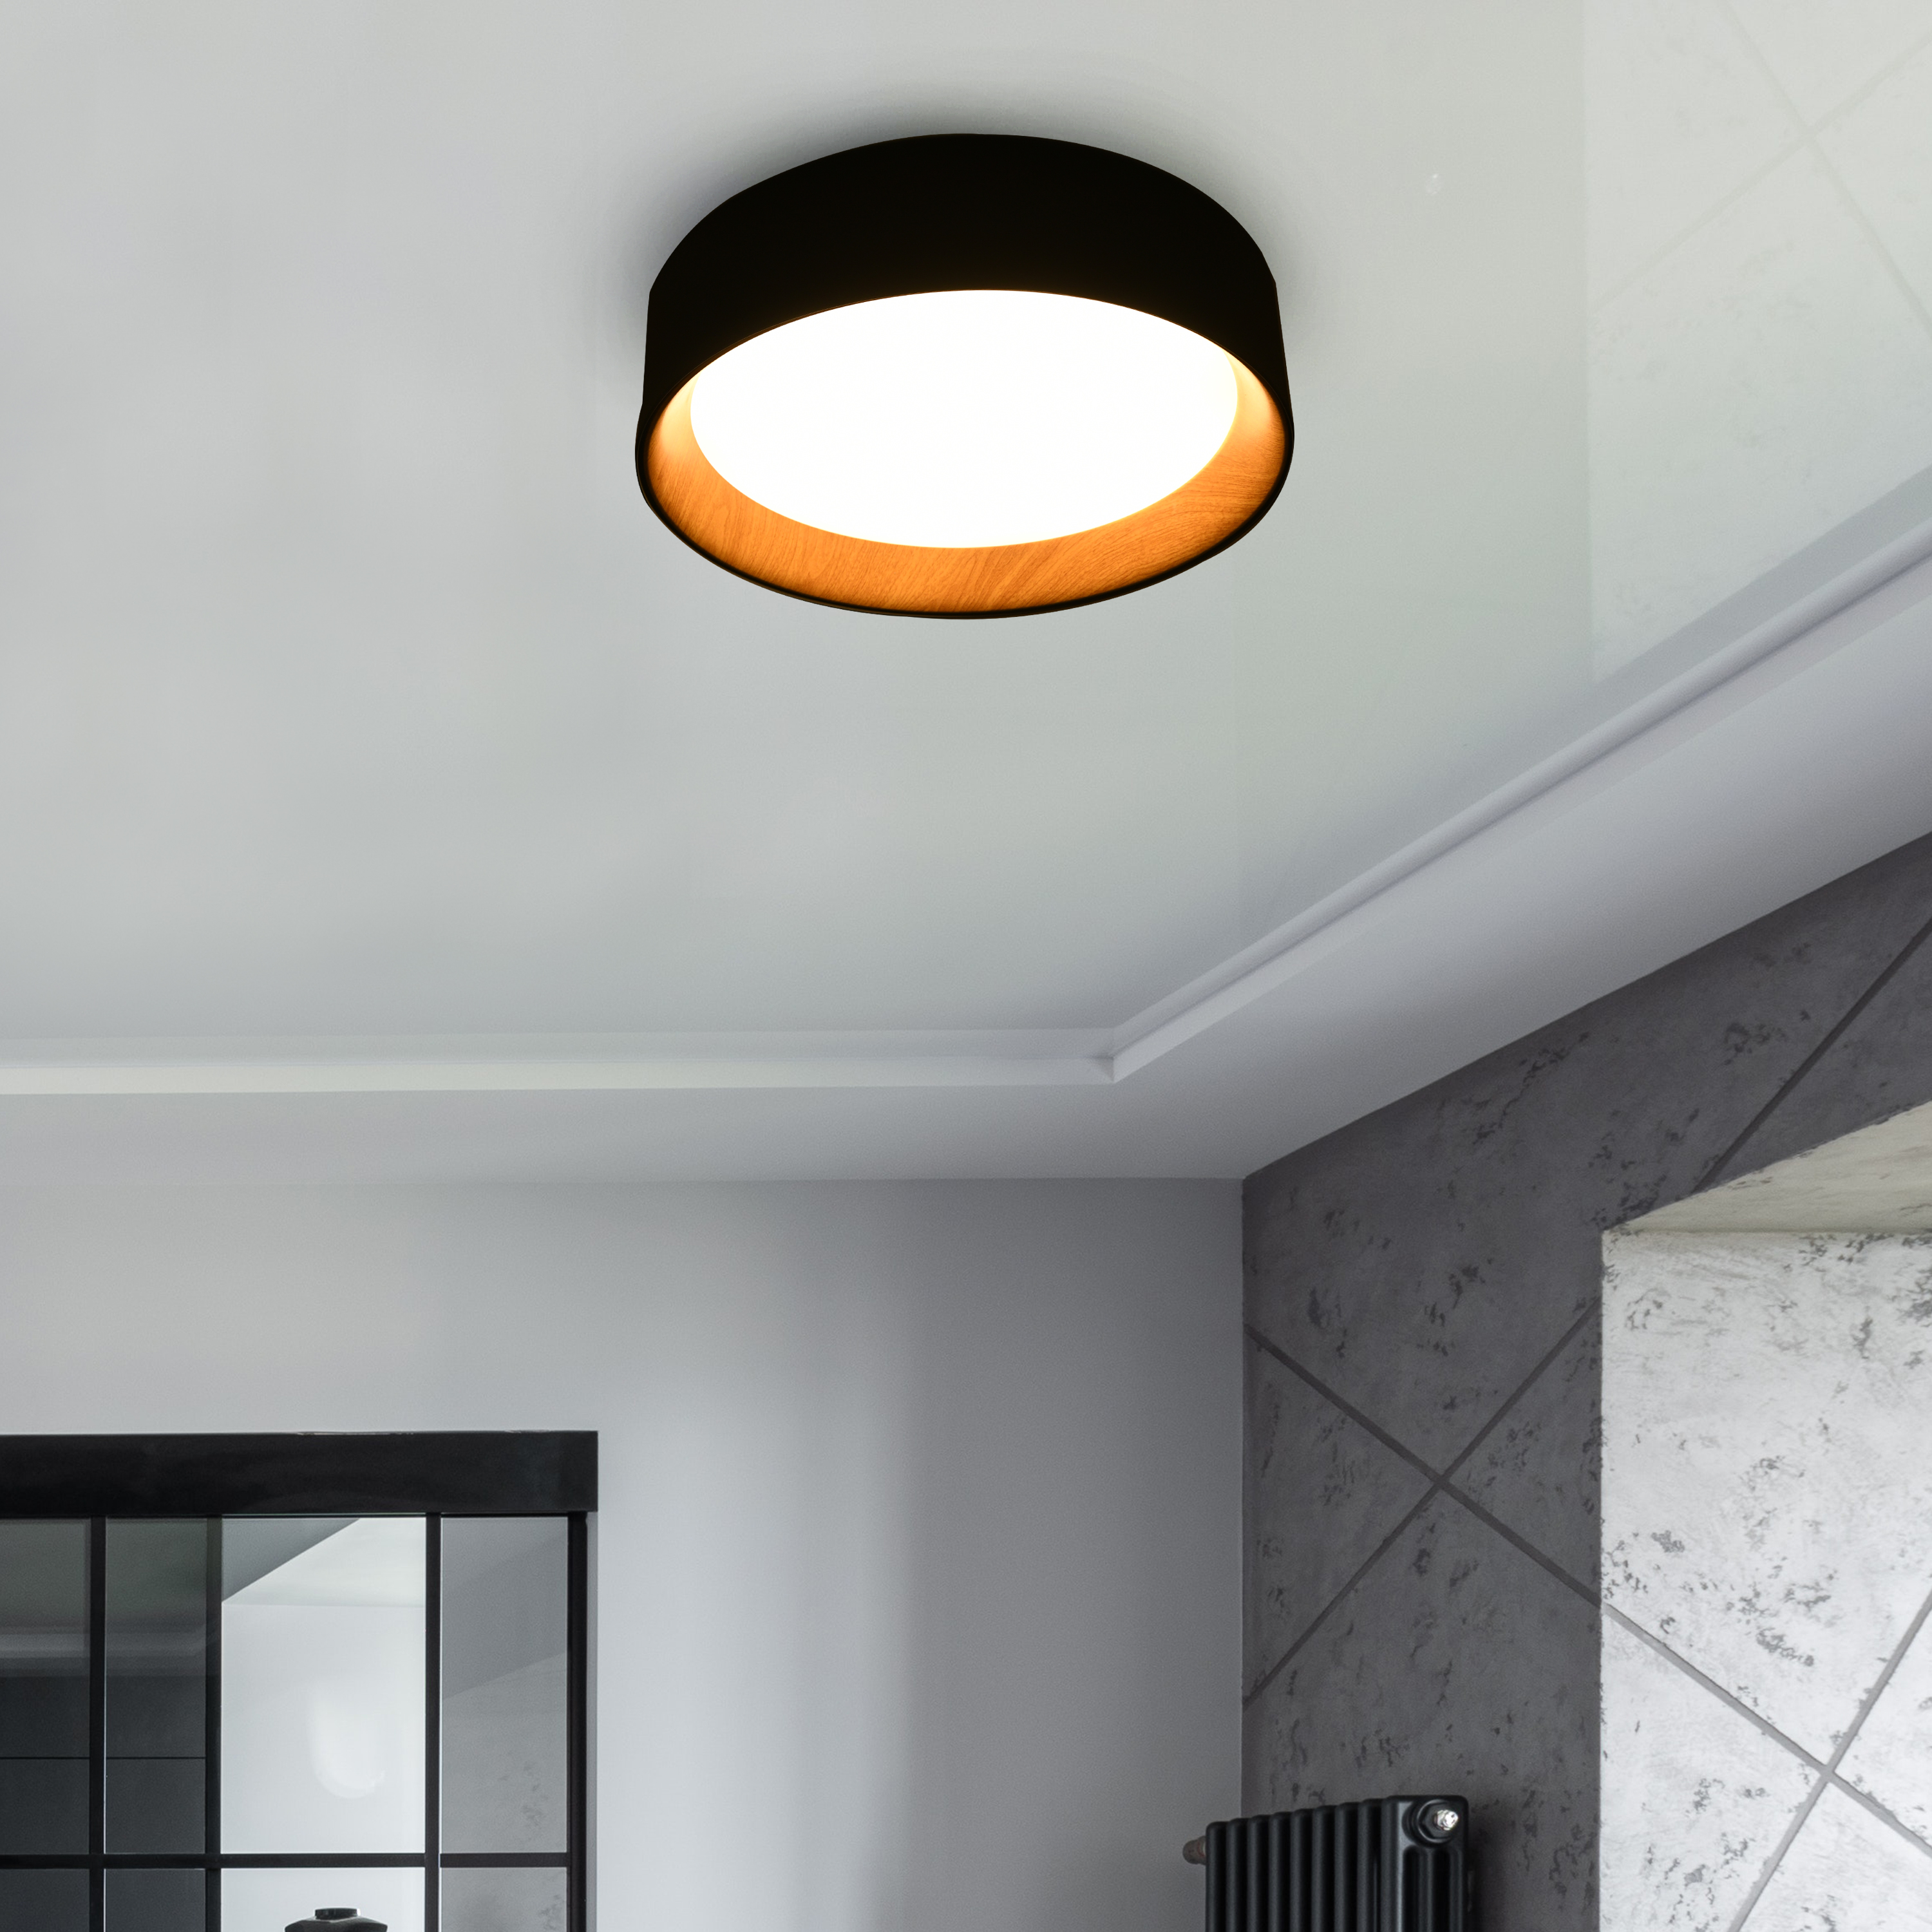 LED Flush Mount Light, Matte Black and Wood Painted Accent (8033/a 500mm)